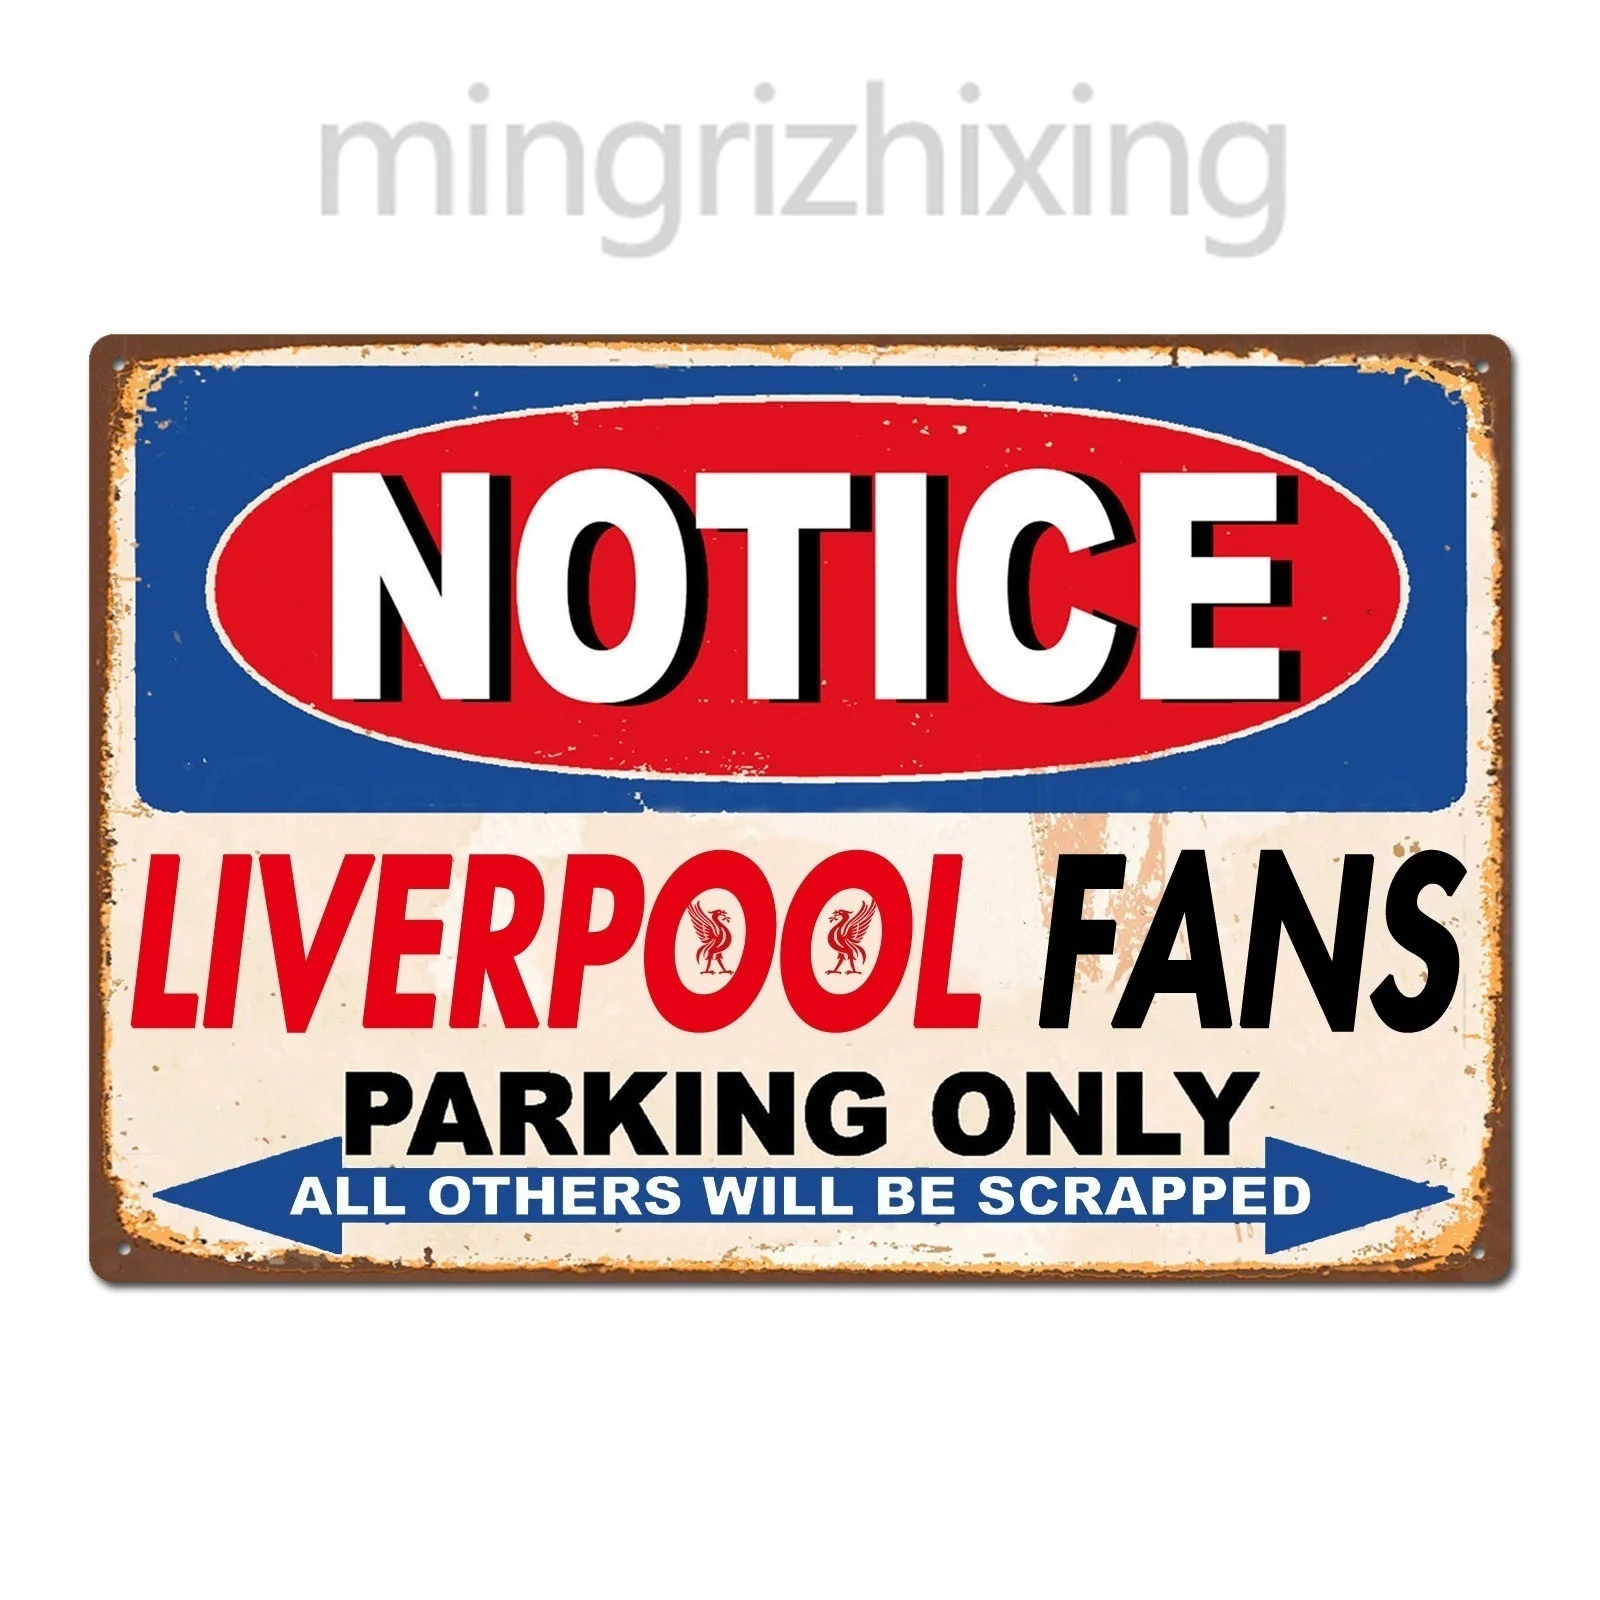 Funny Liverpool FC Football Club Fans Parking Only Vintage Retro Tin Sign Metal Sign Metal Poster Metal Decor Wall Sticker